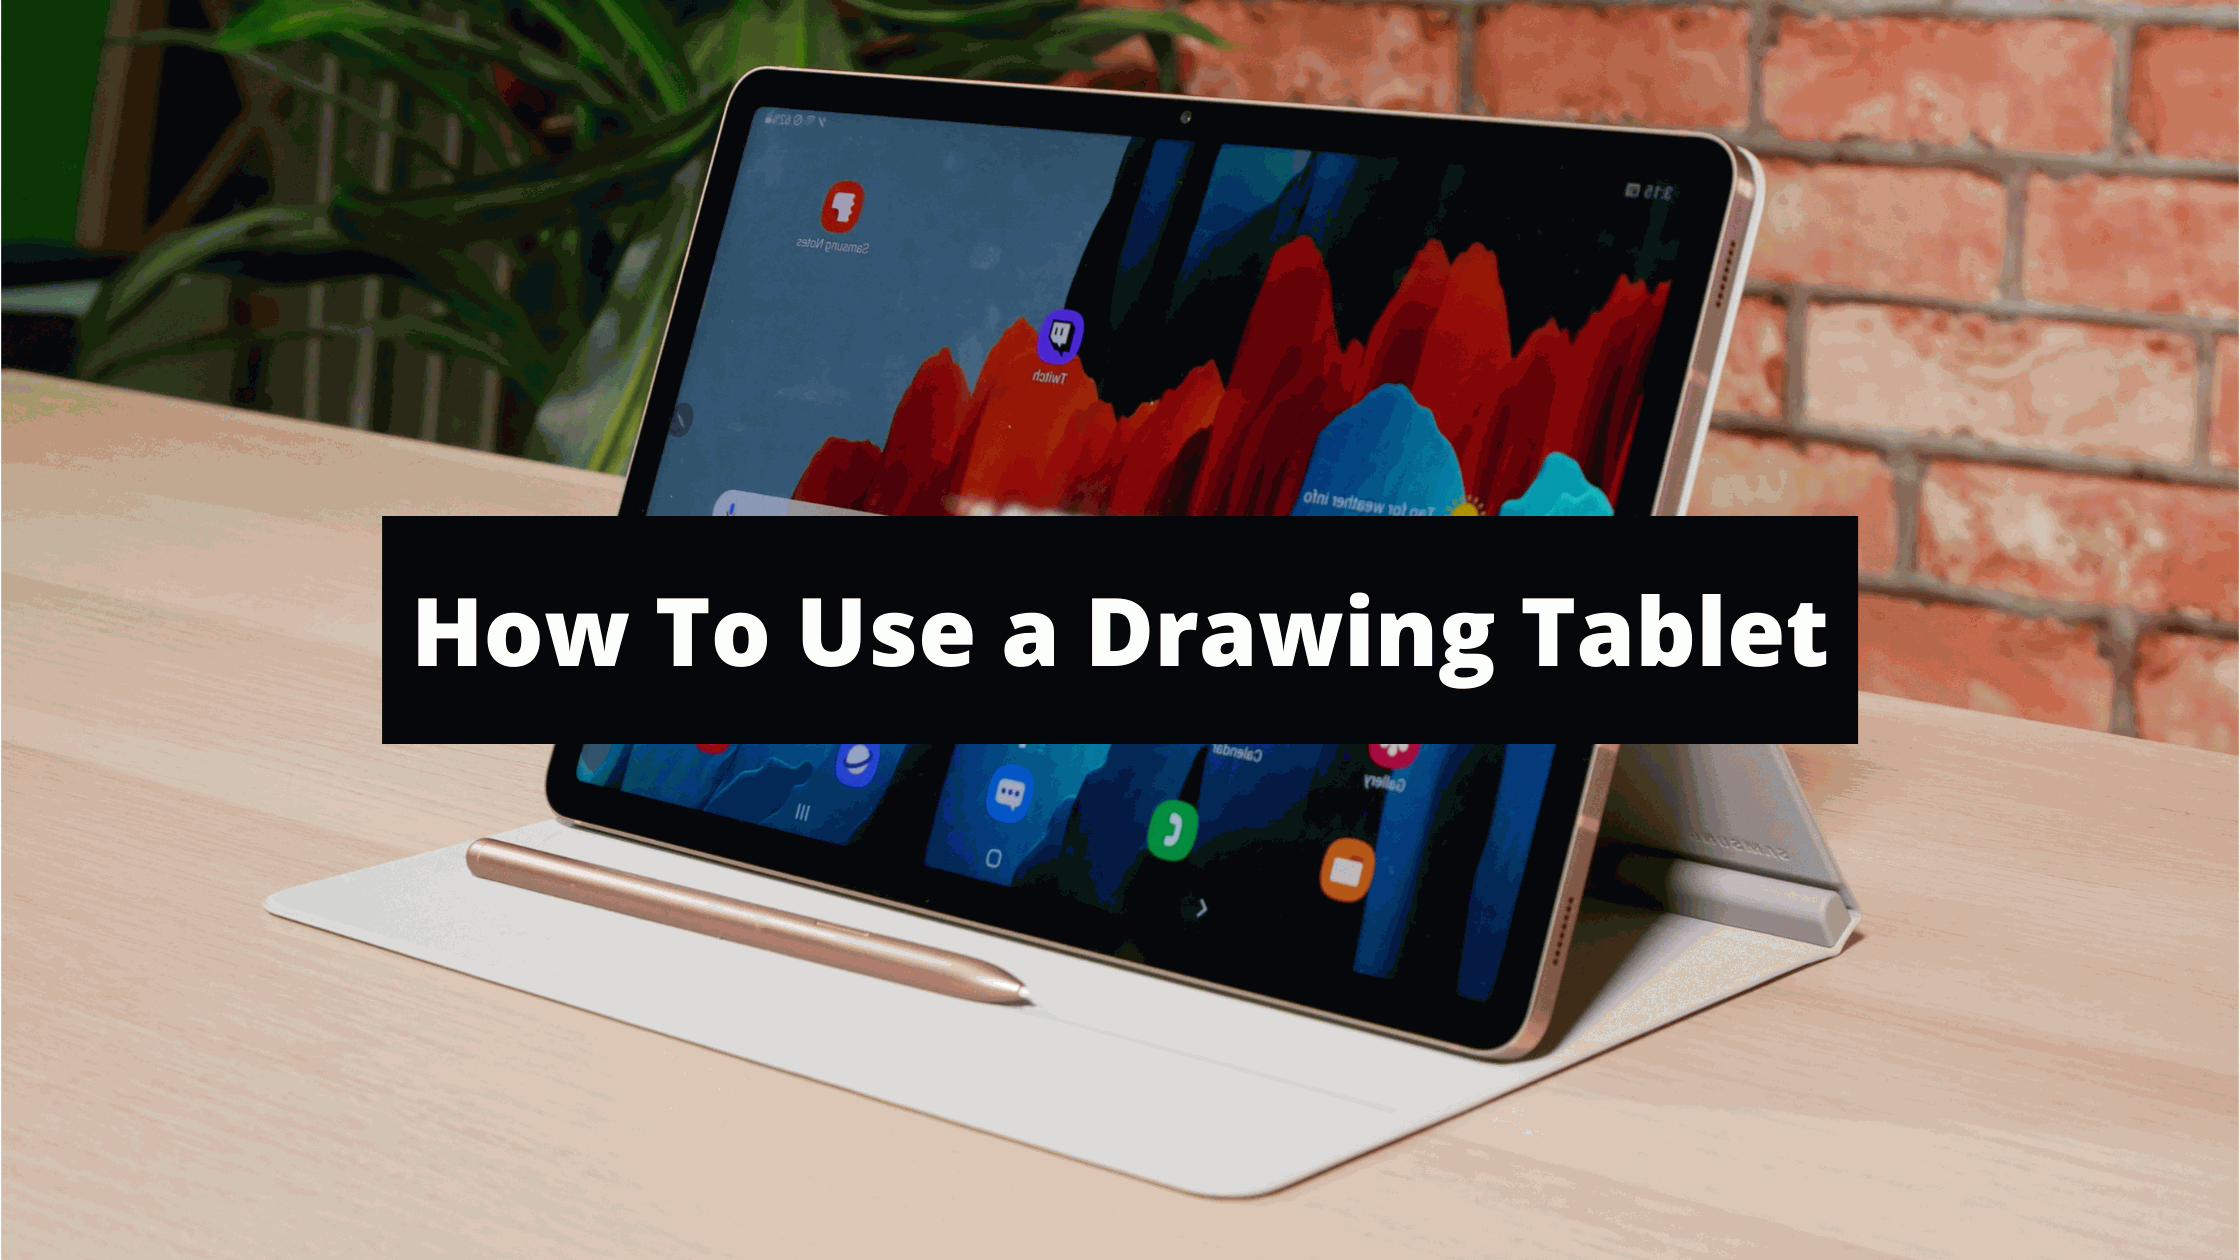 How To Use a Drawing Tablet - Buying Guide